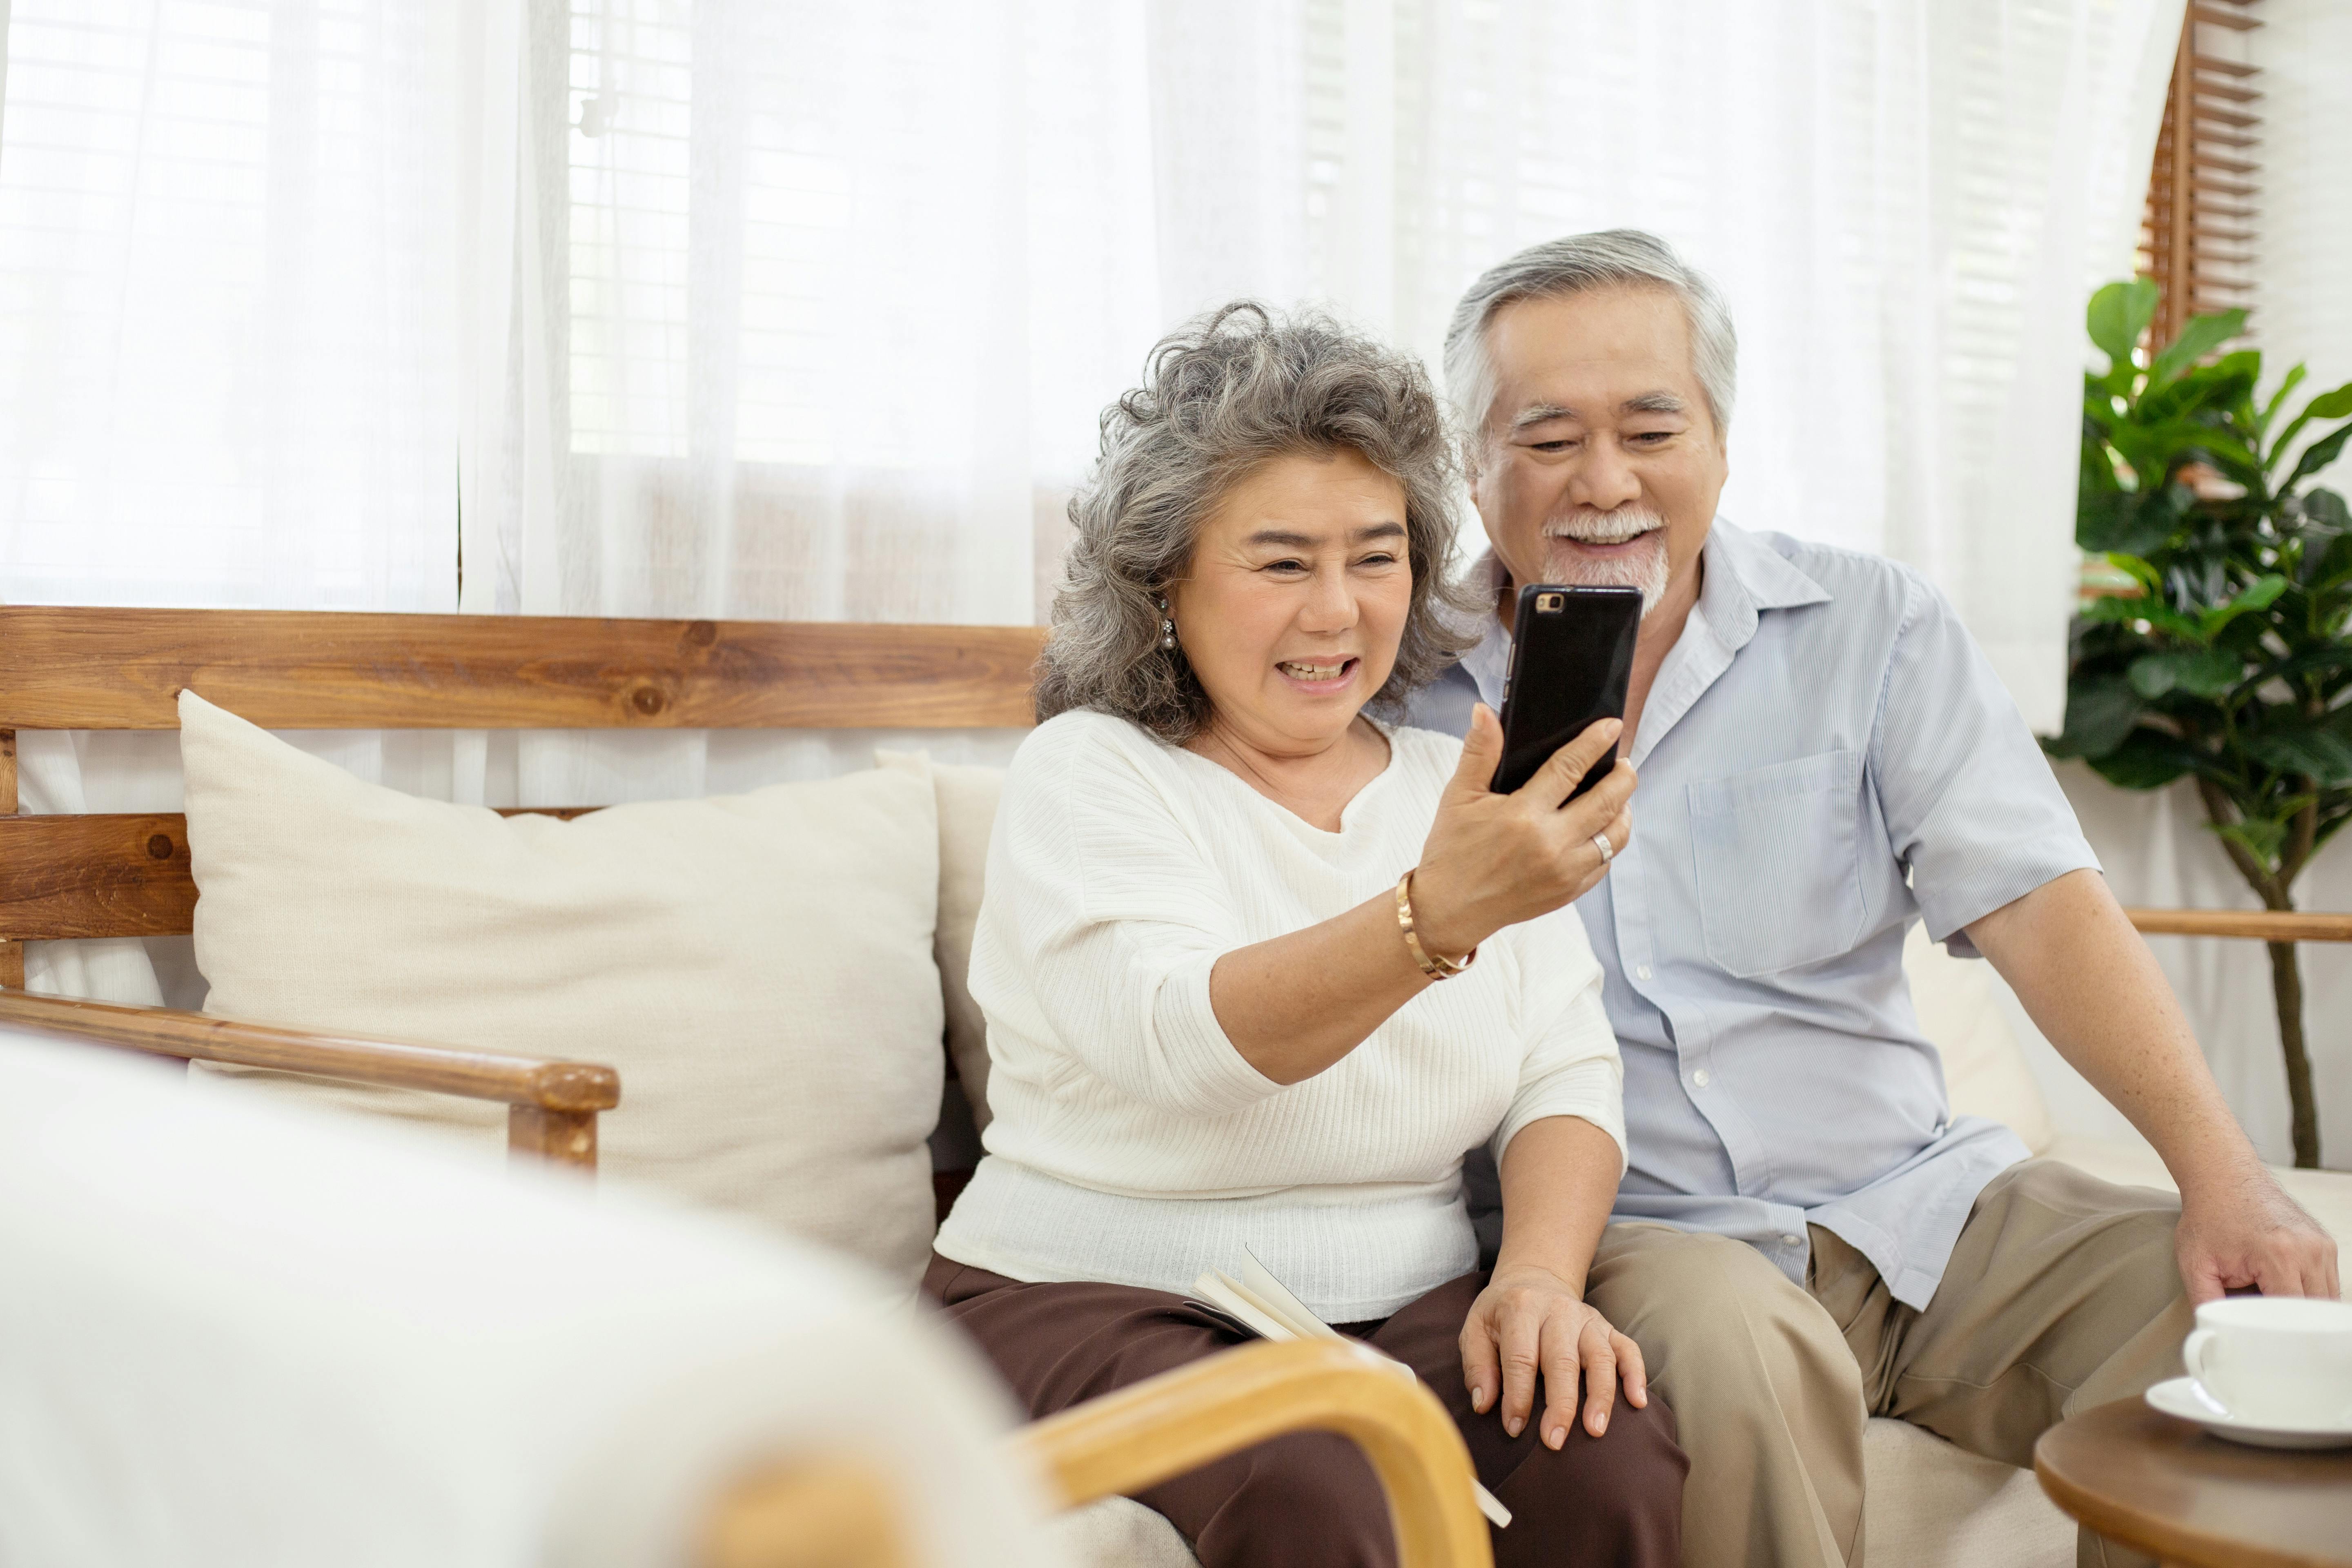 Long-distance caregiving: tips for caring from afar